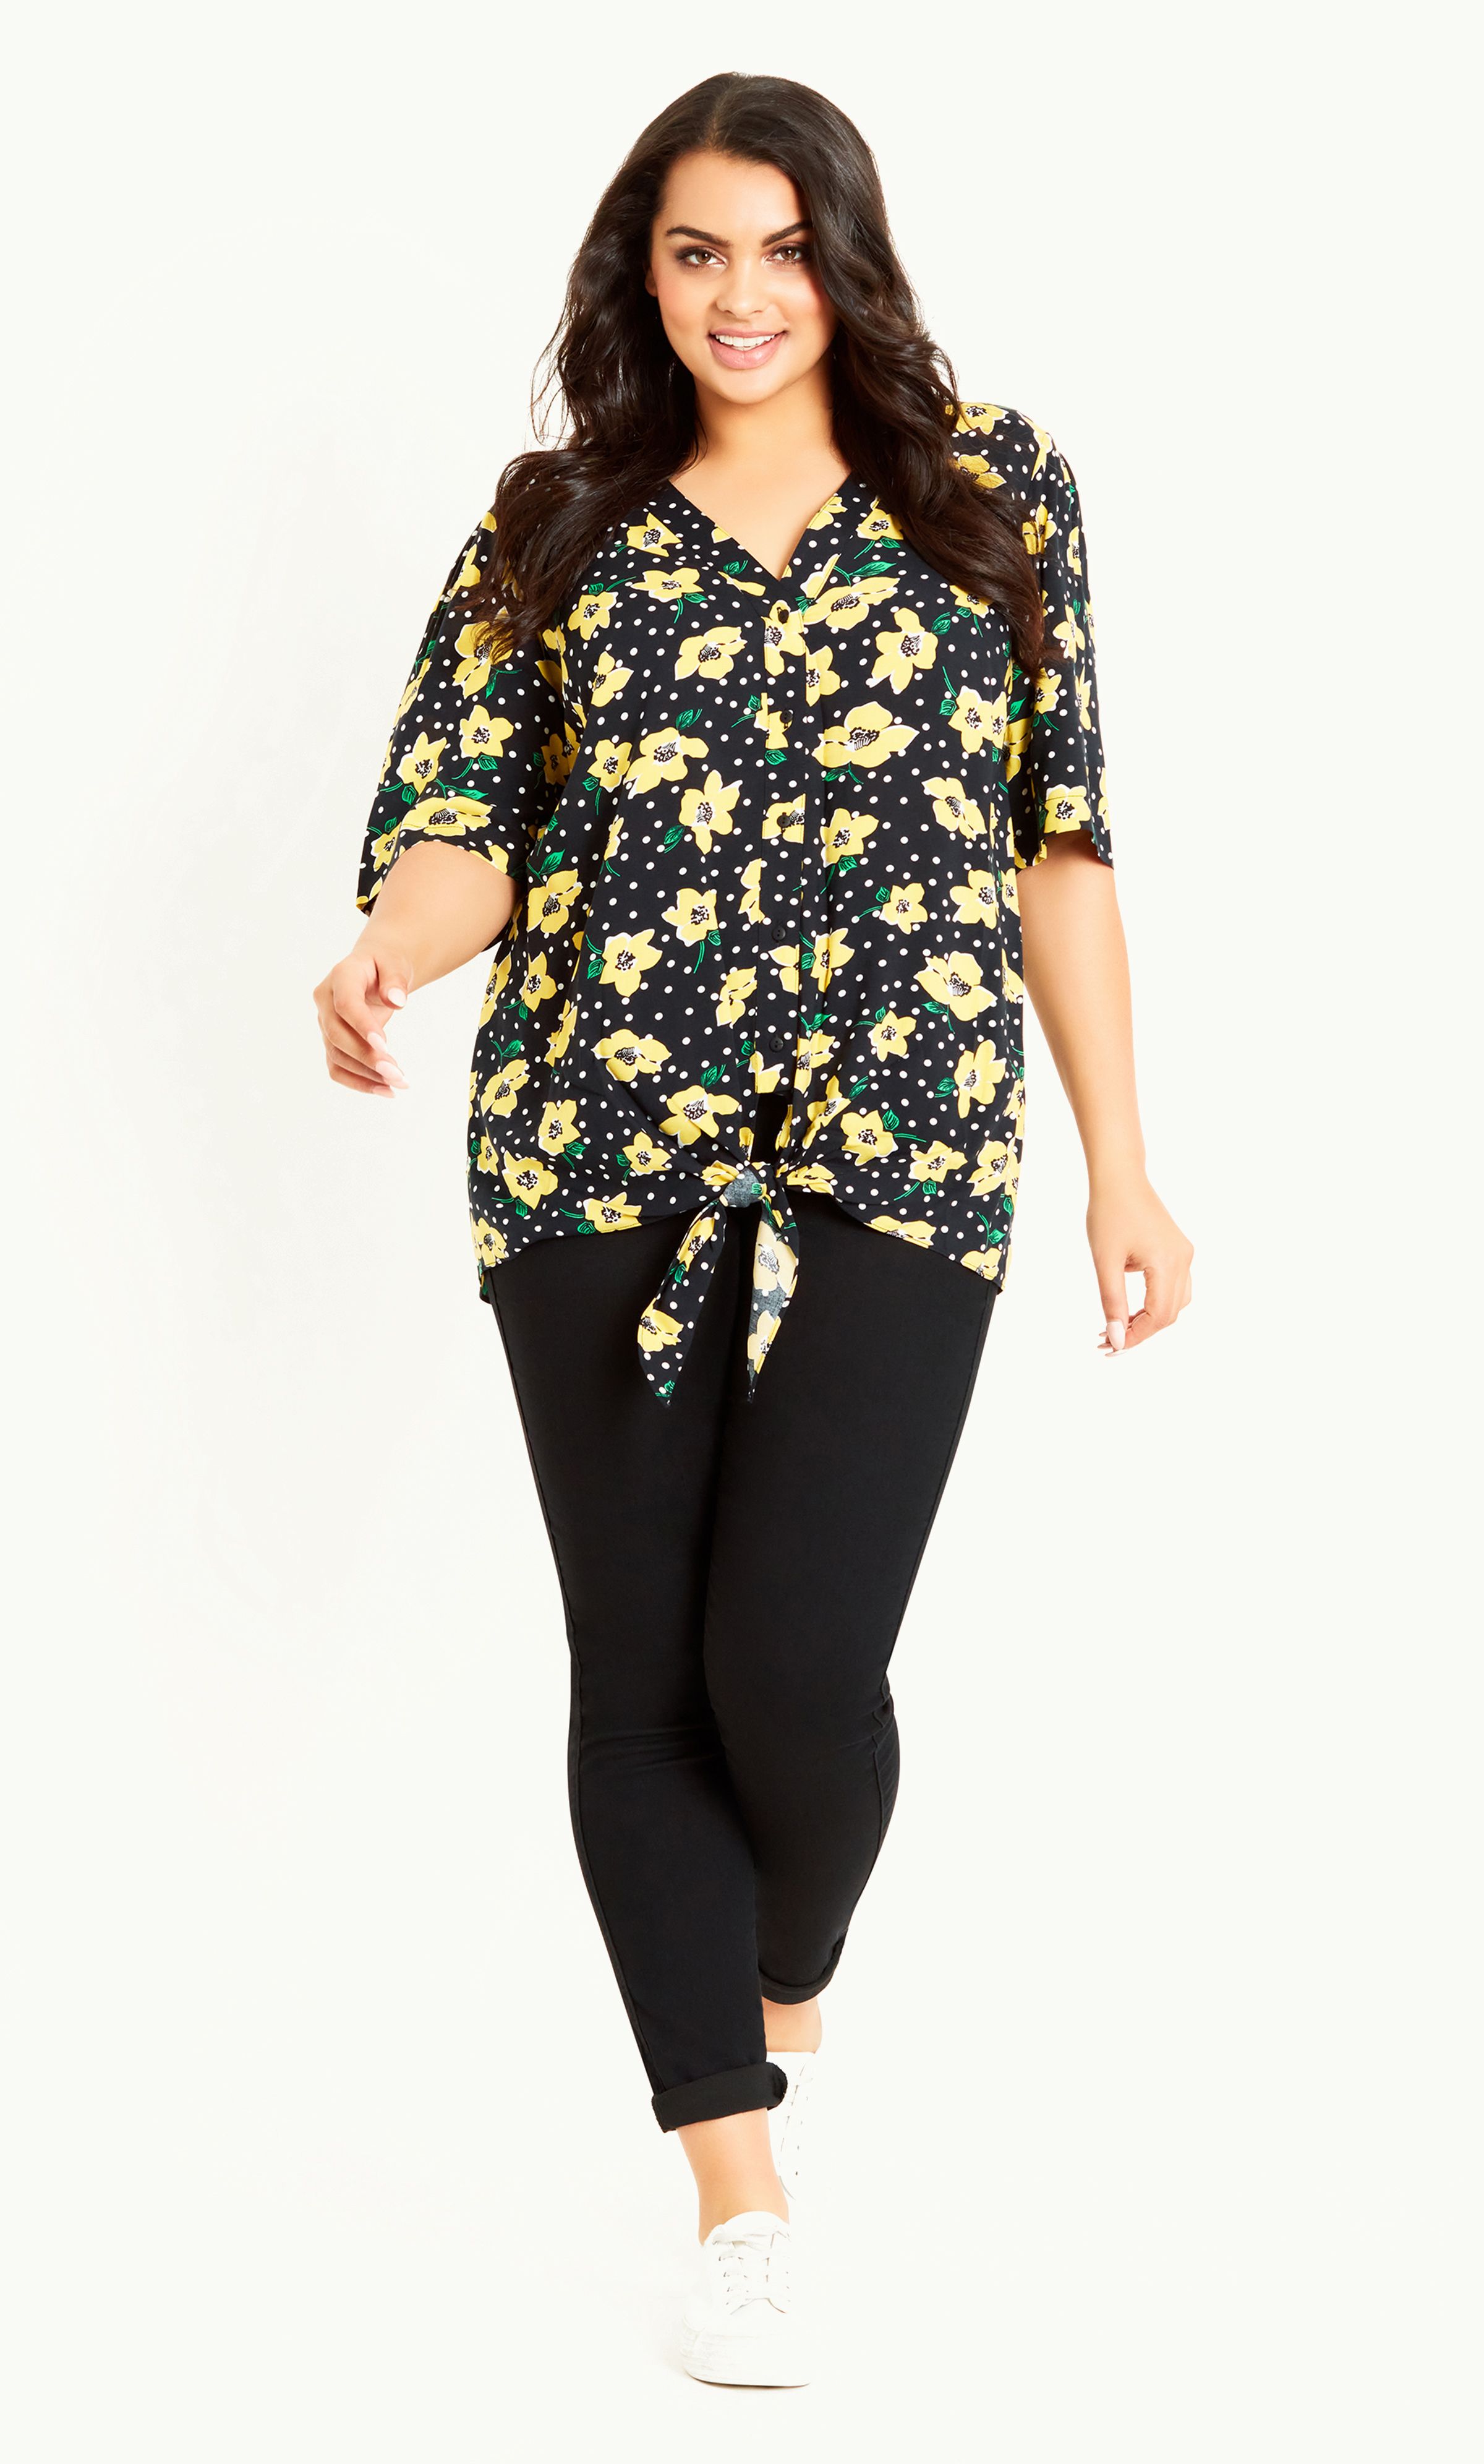 Opt for a totally gorgeous floral print this summer in our Tie Front Print Top! Featuring a V-neckline, short sleeves and buttoned front, this top sure knows how to make a style statement. Key Features Include: - V-neckline - Short sleeves - Textured fabrication with slight stretch - Relaxed fit - Buttoned front - Tie feature - Unlined - Hip length Style with straight jeans, canvas trainers and a cross body bag for the weekend.